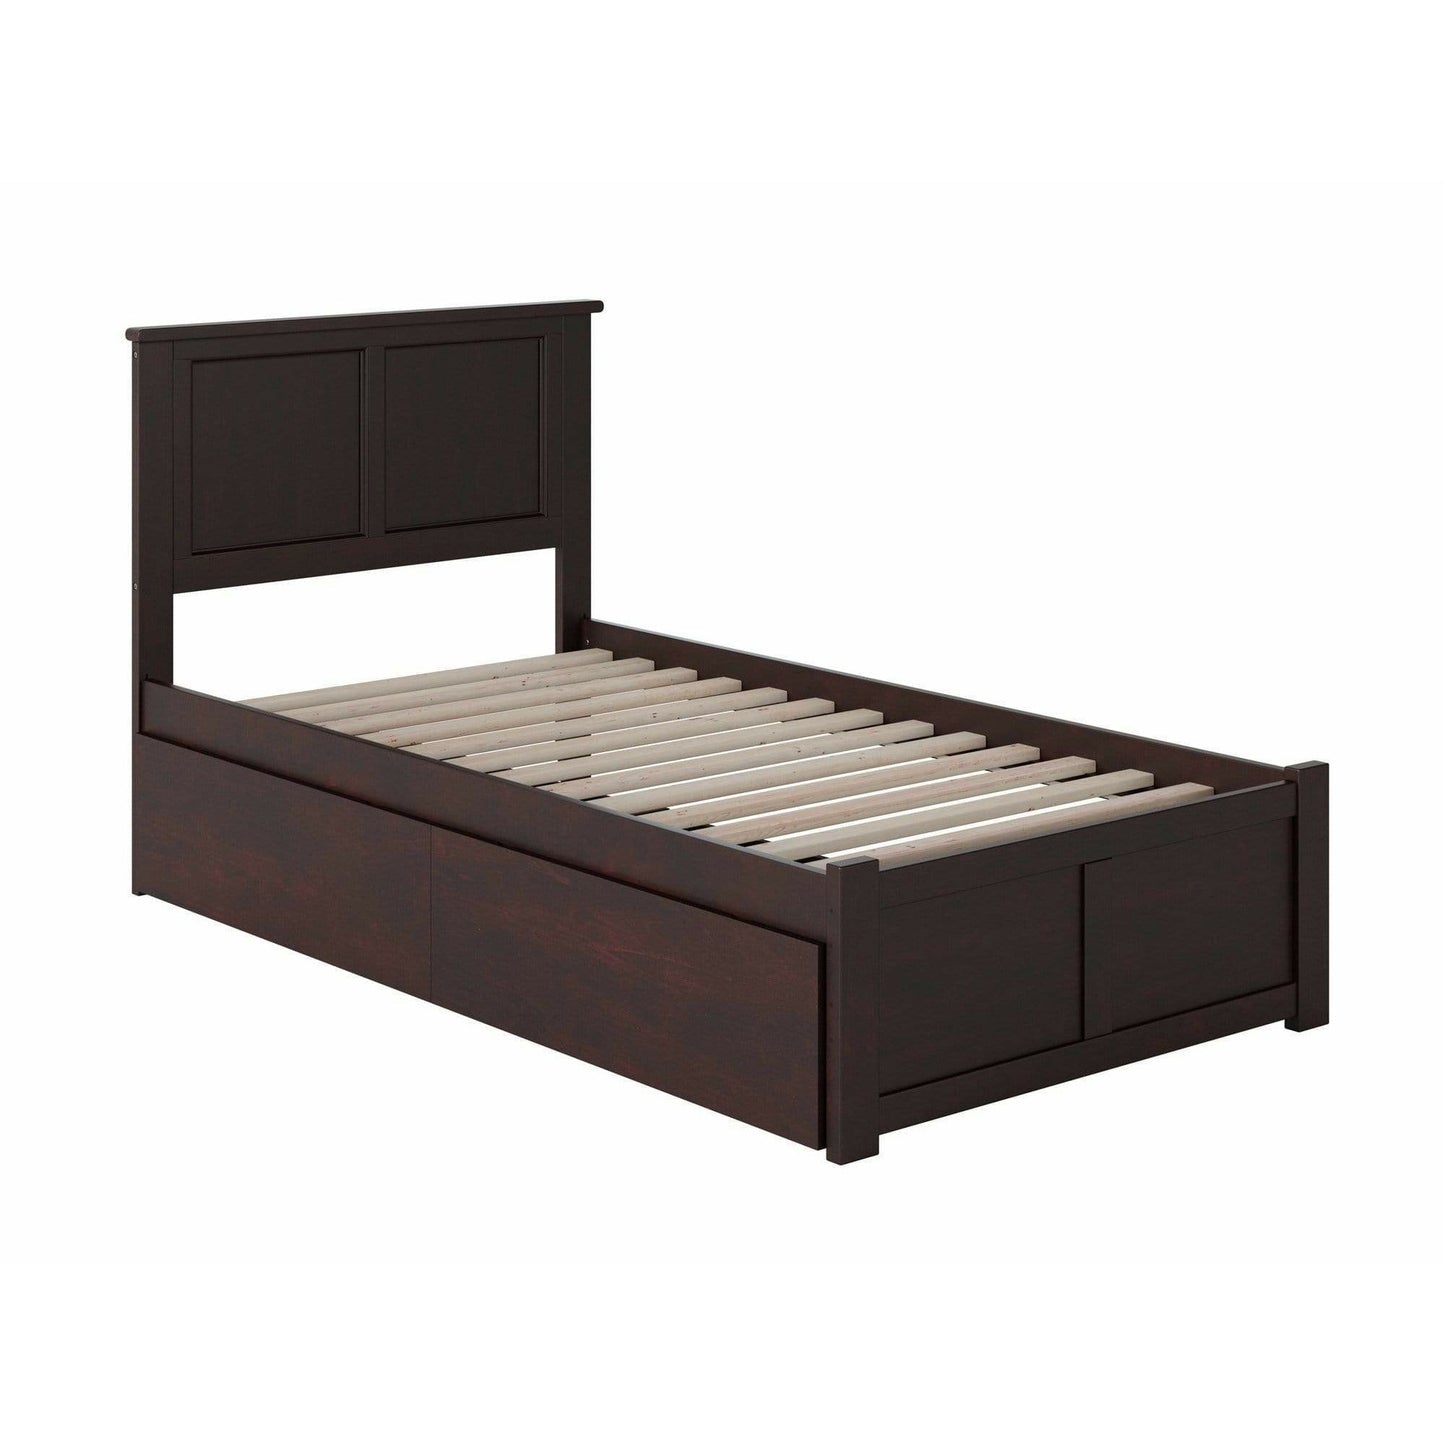 AFI Furnishings Madison Twin XL Platform Bed with Flat Panel Foot Board and 2 Urban Bed Drawers